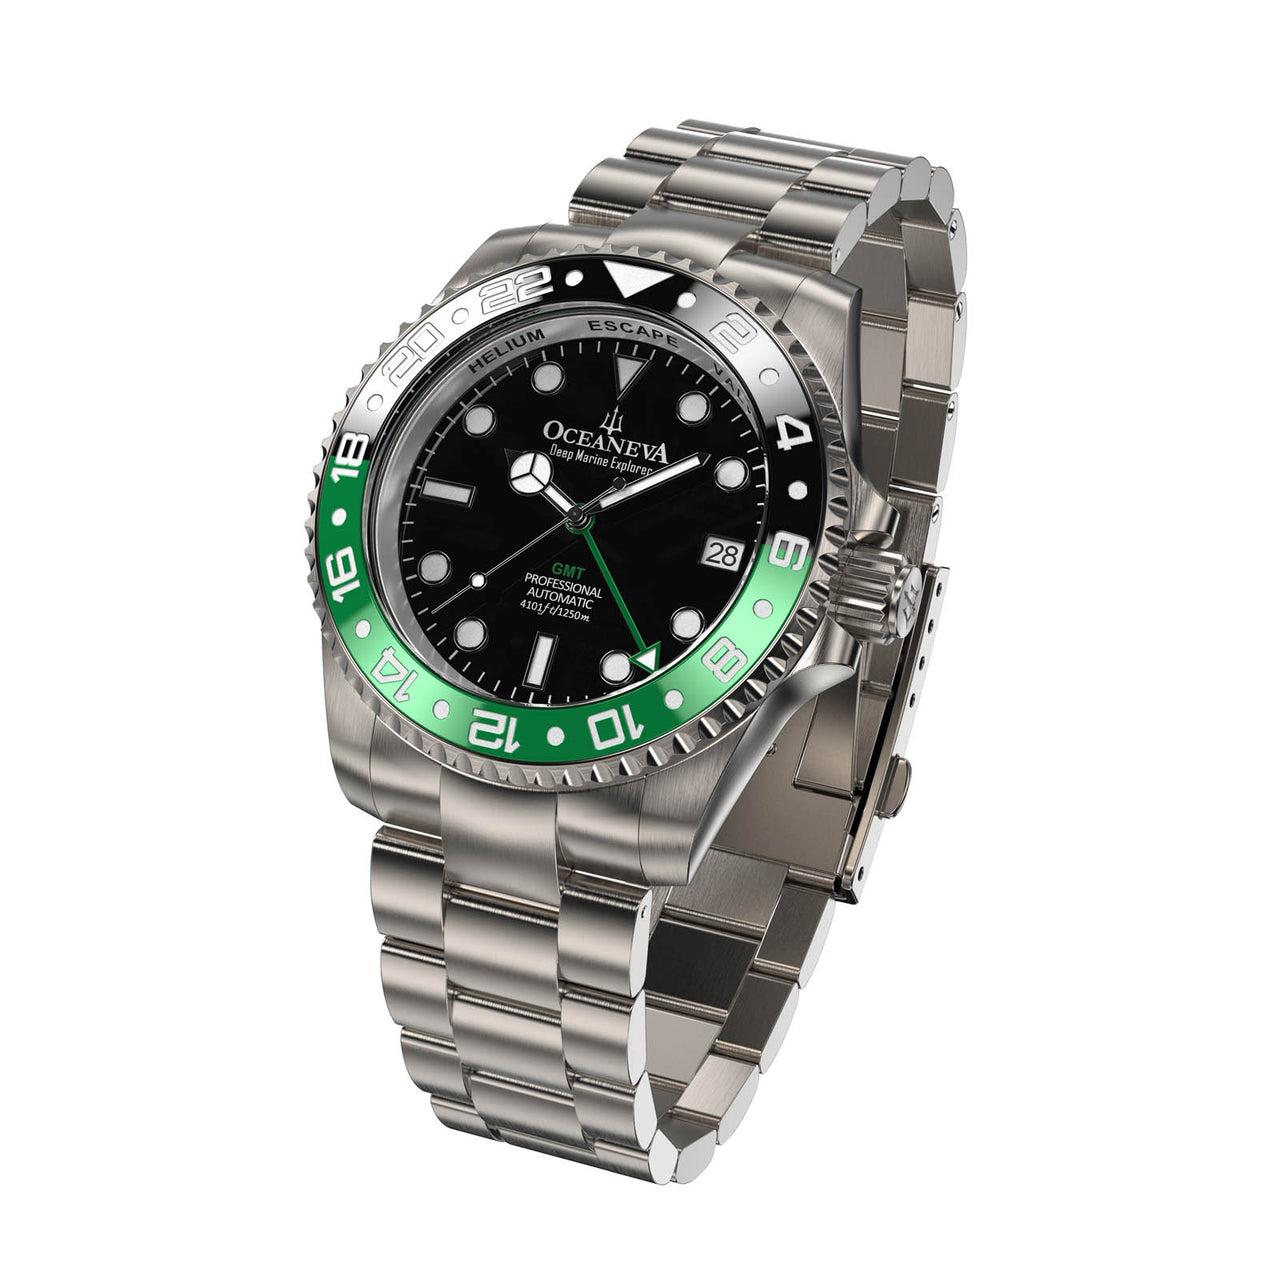 Oceaneva Titanium Watch equipped for accuracy with Seiko Japan NH34 movement